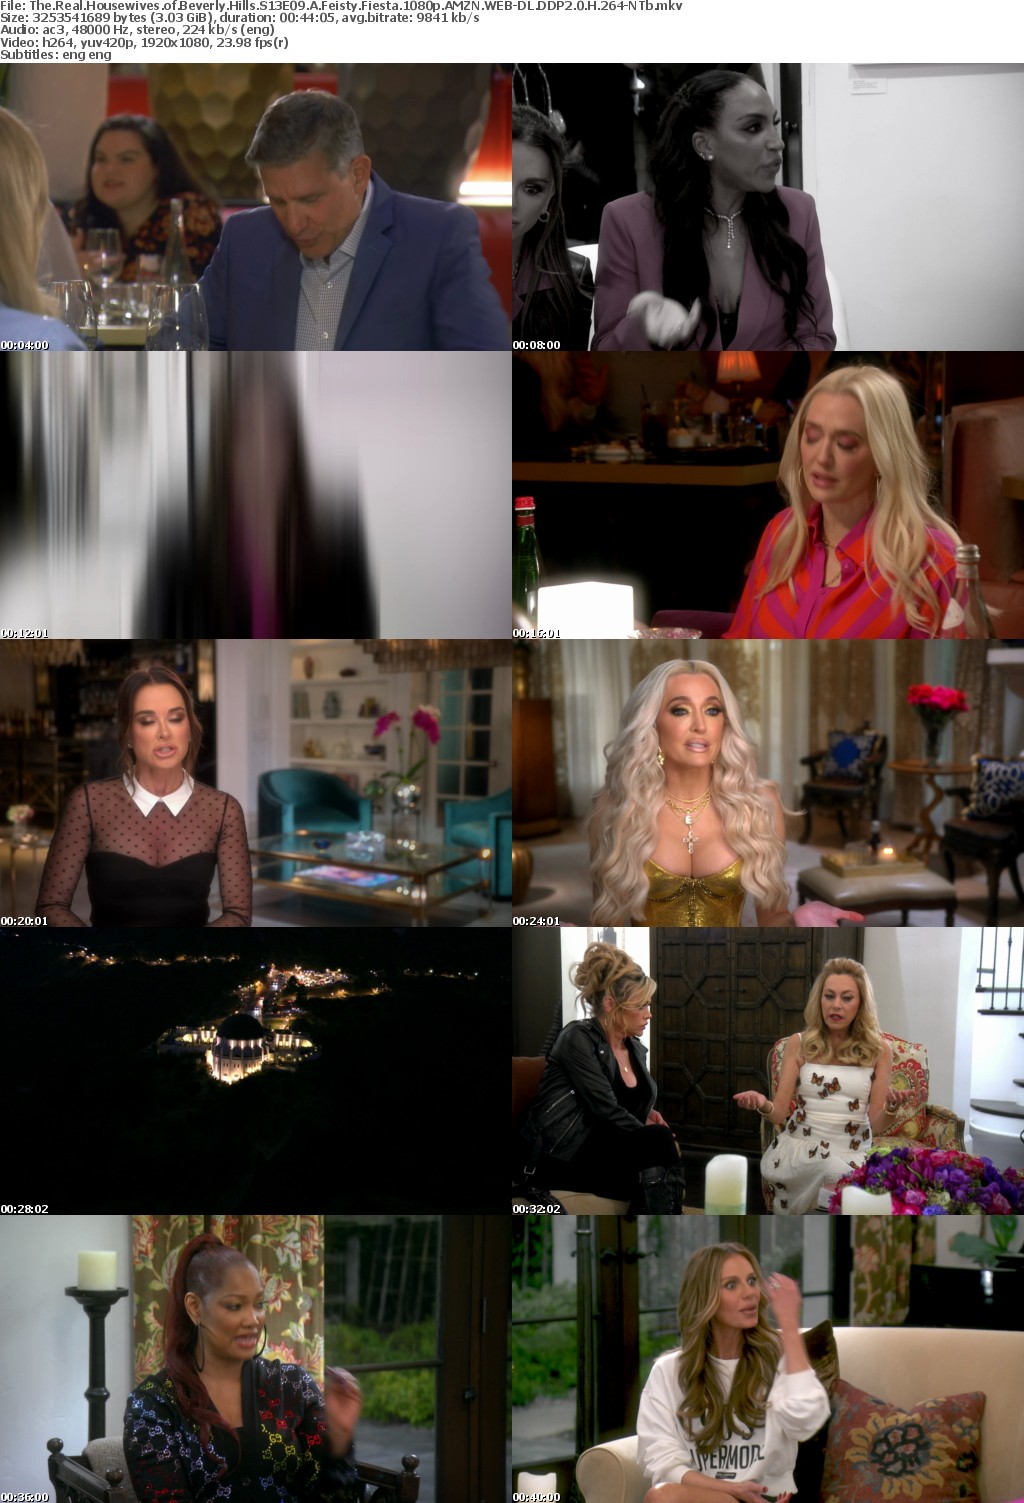 The Real Housewives of Beverly Hills S13E09 A Feisty Fiesta 1080p AMZN WEB-DL DDP2 0 H 264-NTb